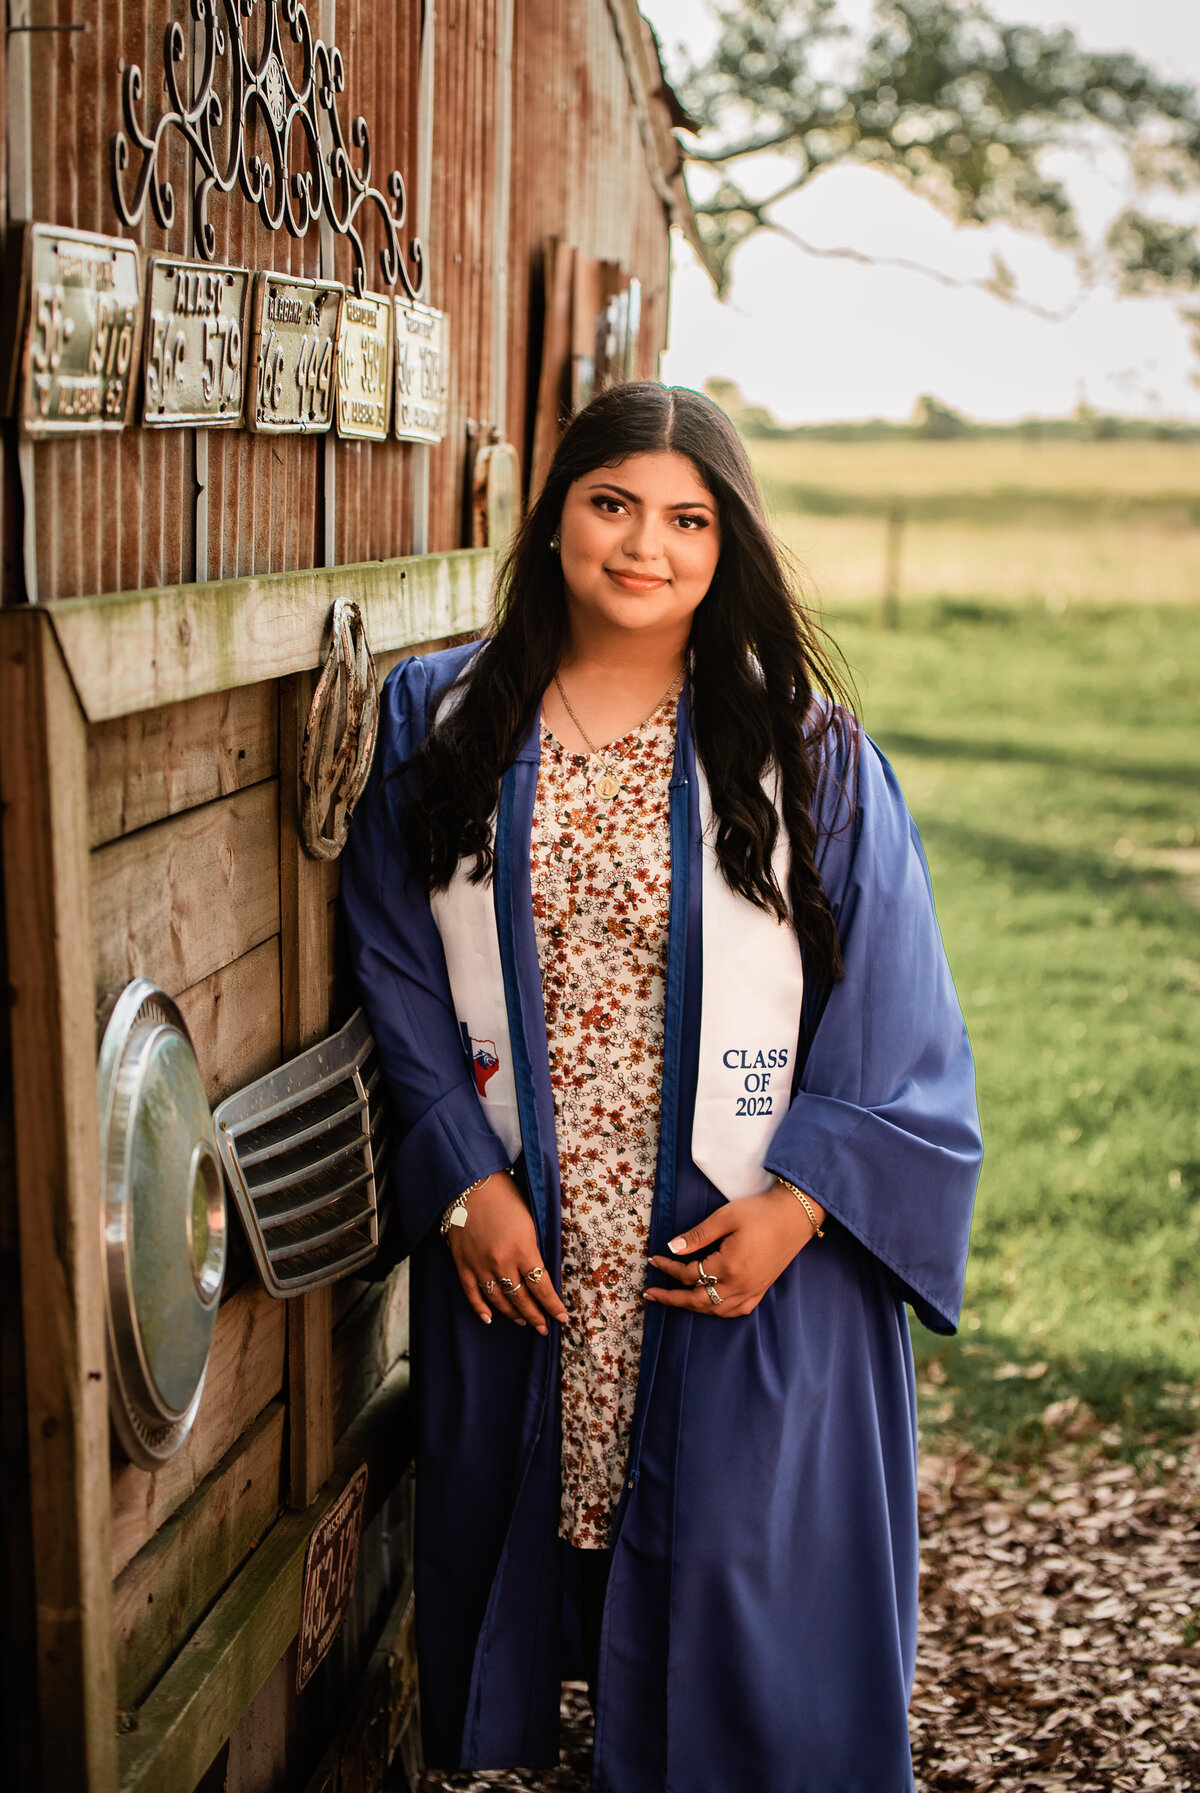 A high school senior wearing her blue gown leans against a blue building.